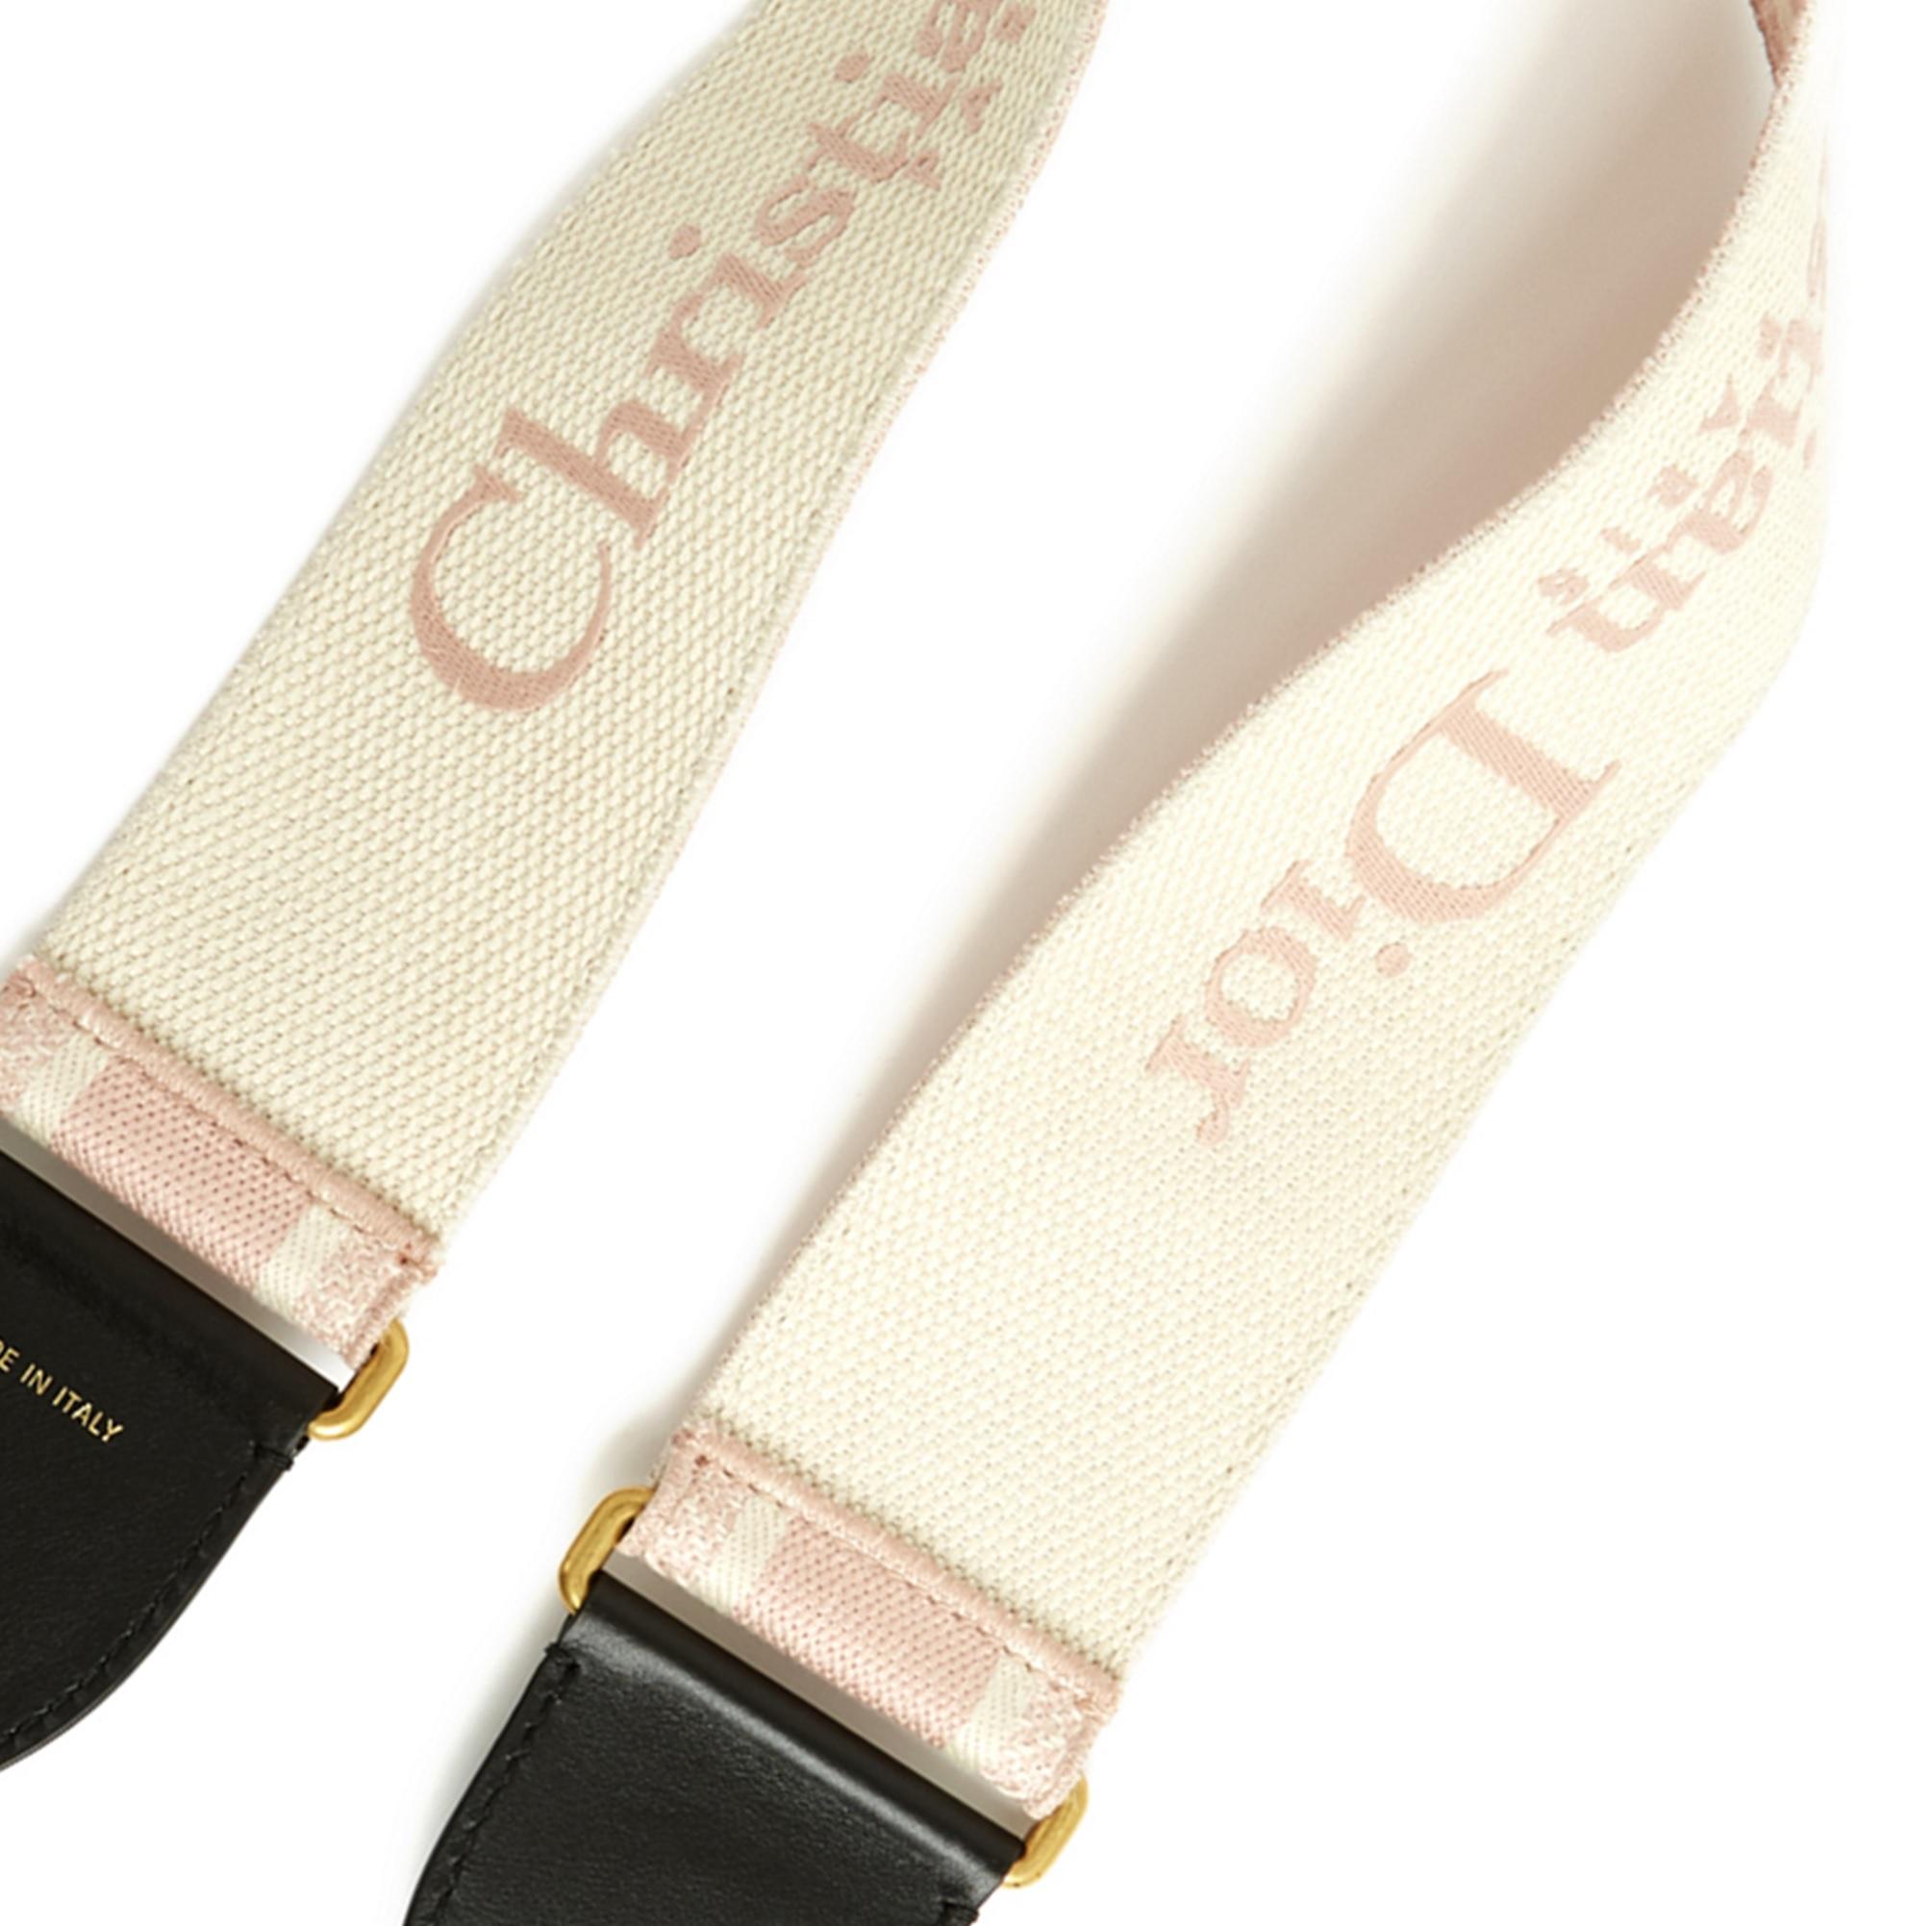 Dior shoulder strap in pink and ecru cotton strap, black leather yokes and gold metal carabiners at each end, embroidered with the Christian Dior logo on each side of the strap. Length 95cm, width 6.5cm. The shoulder strap is new with original tag,